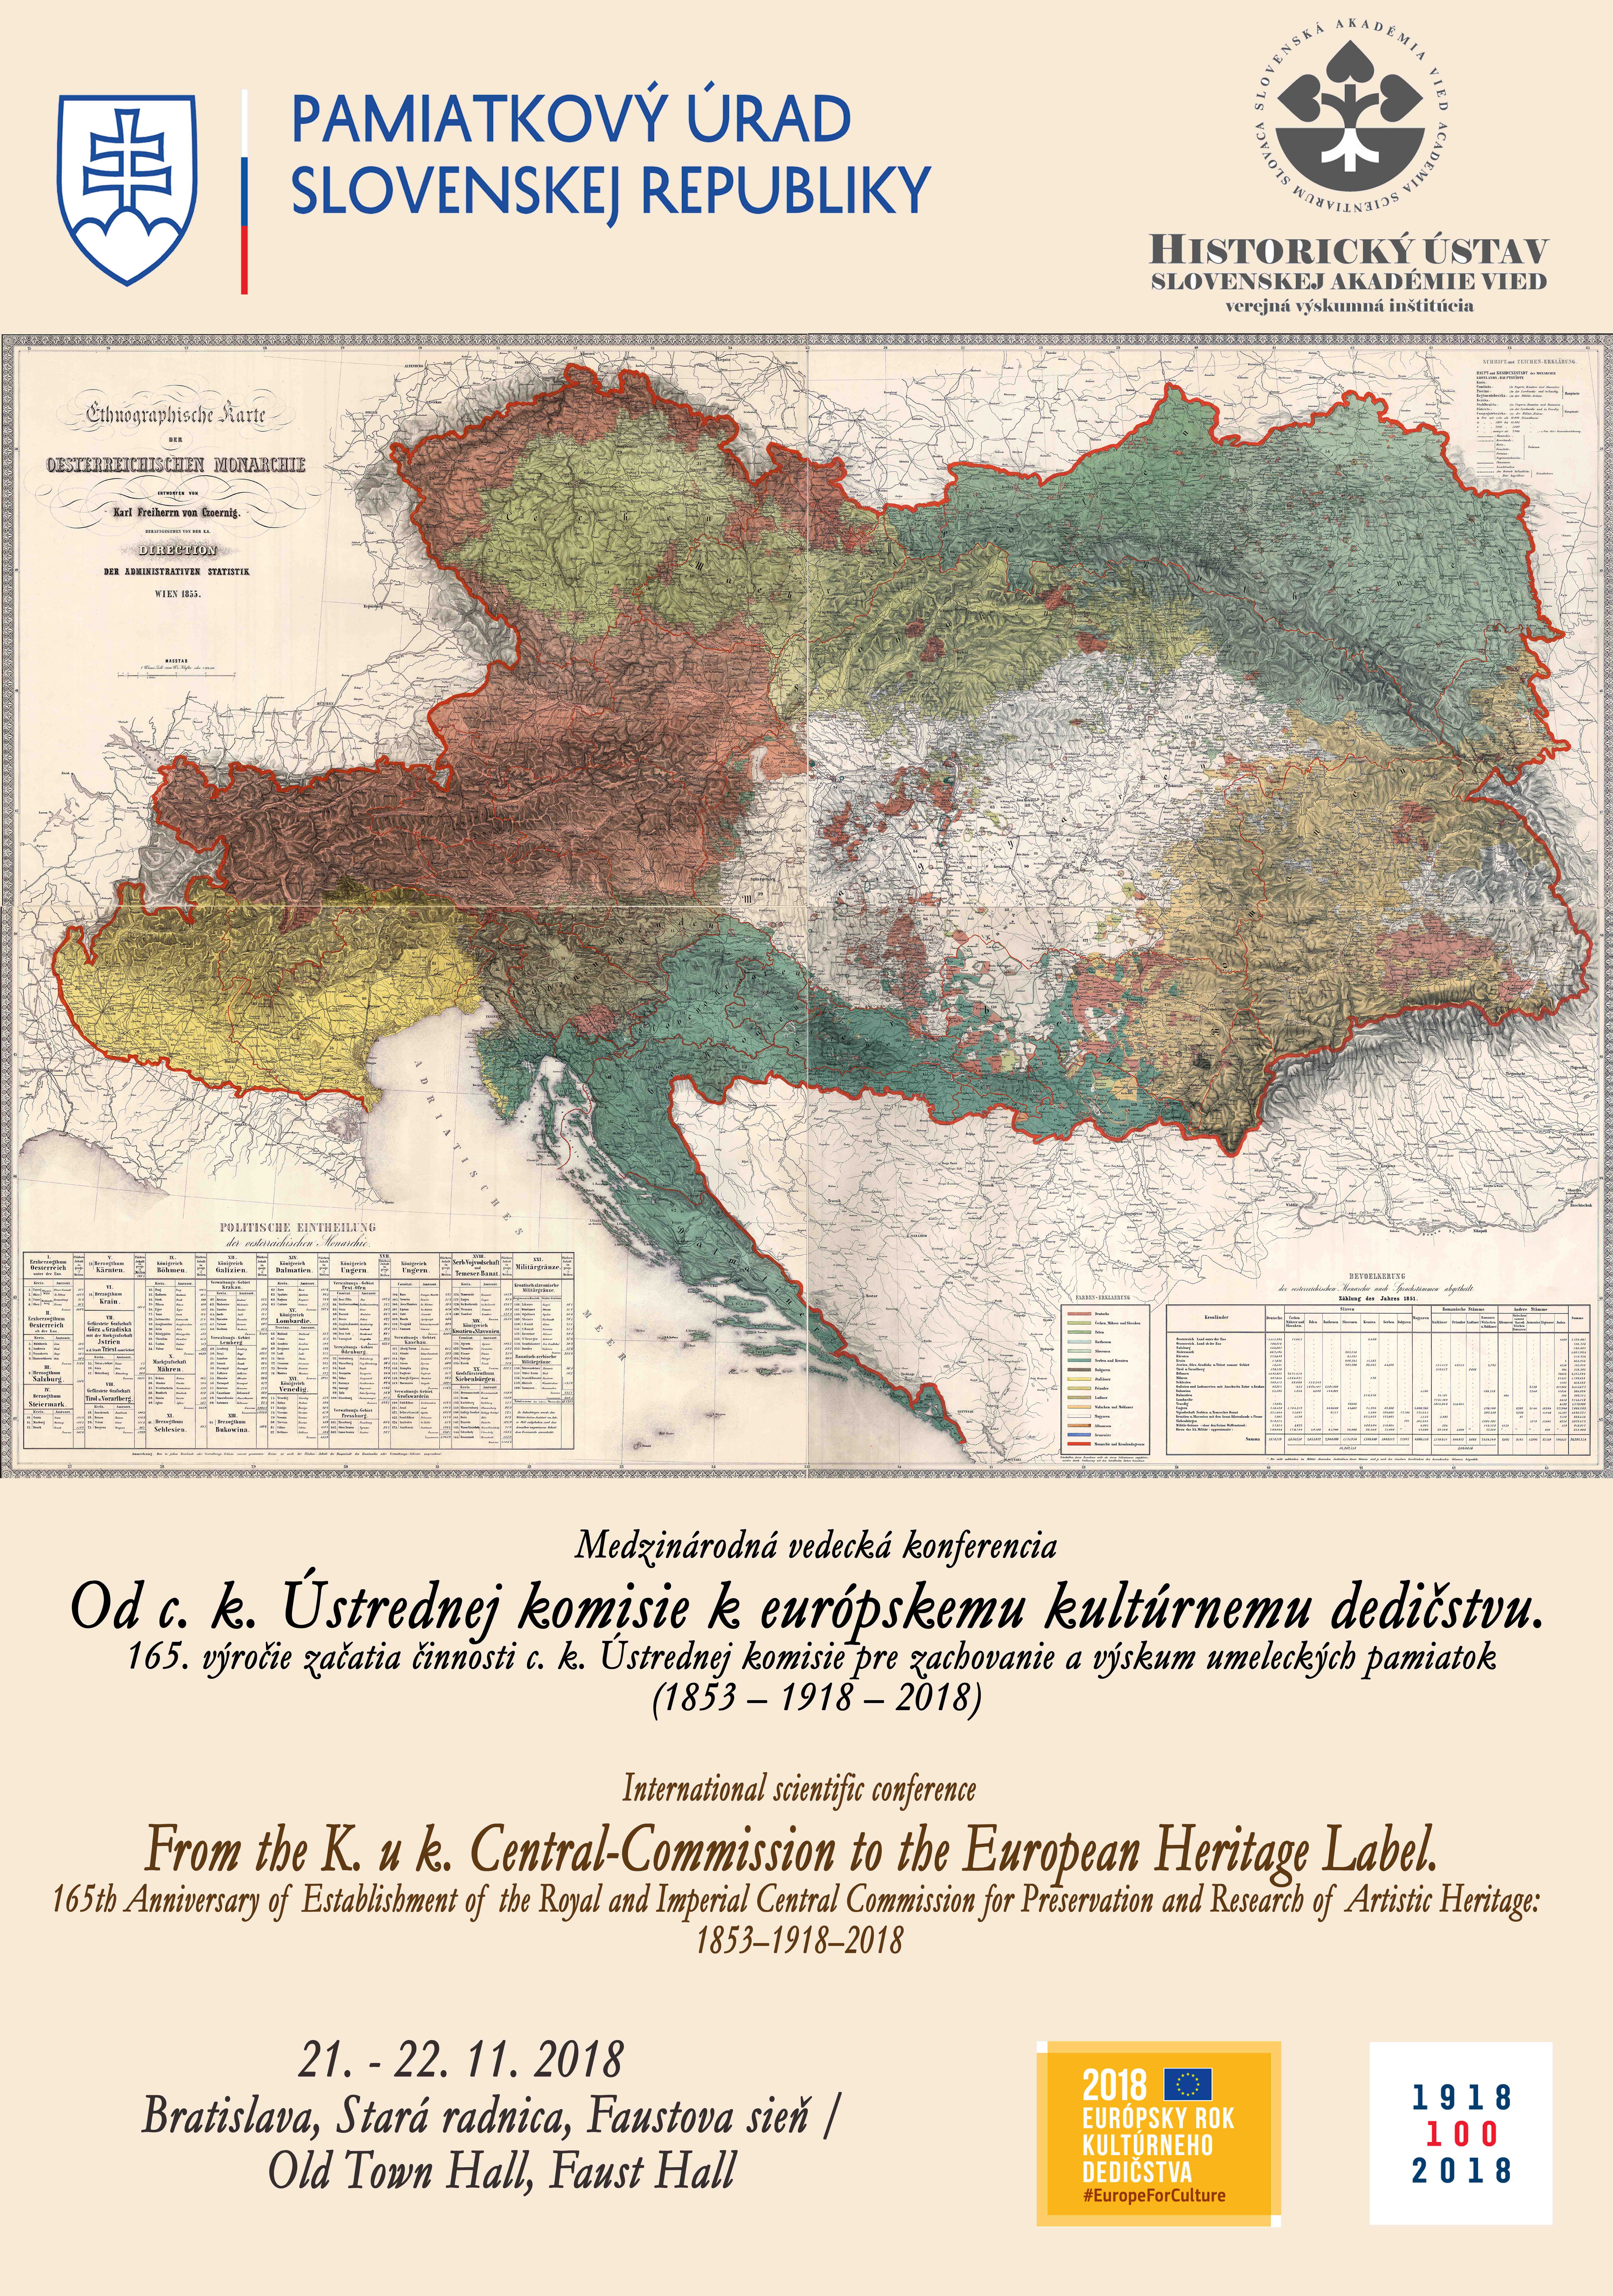 From the K. u k. Central-Commission to the European Heritage Label 